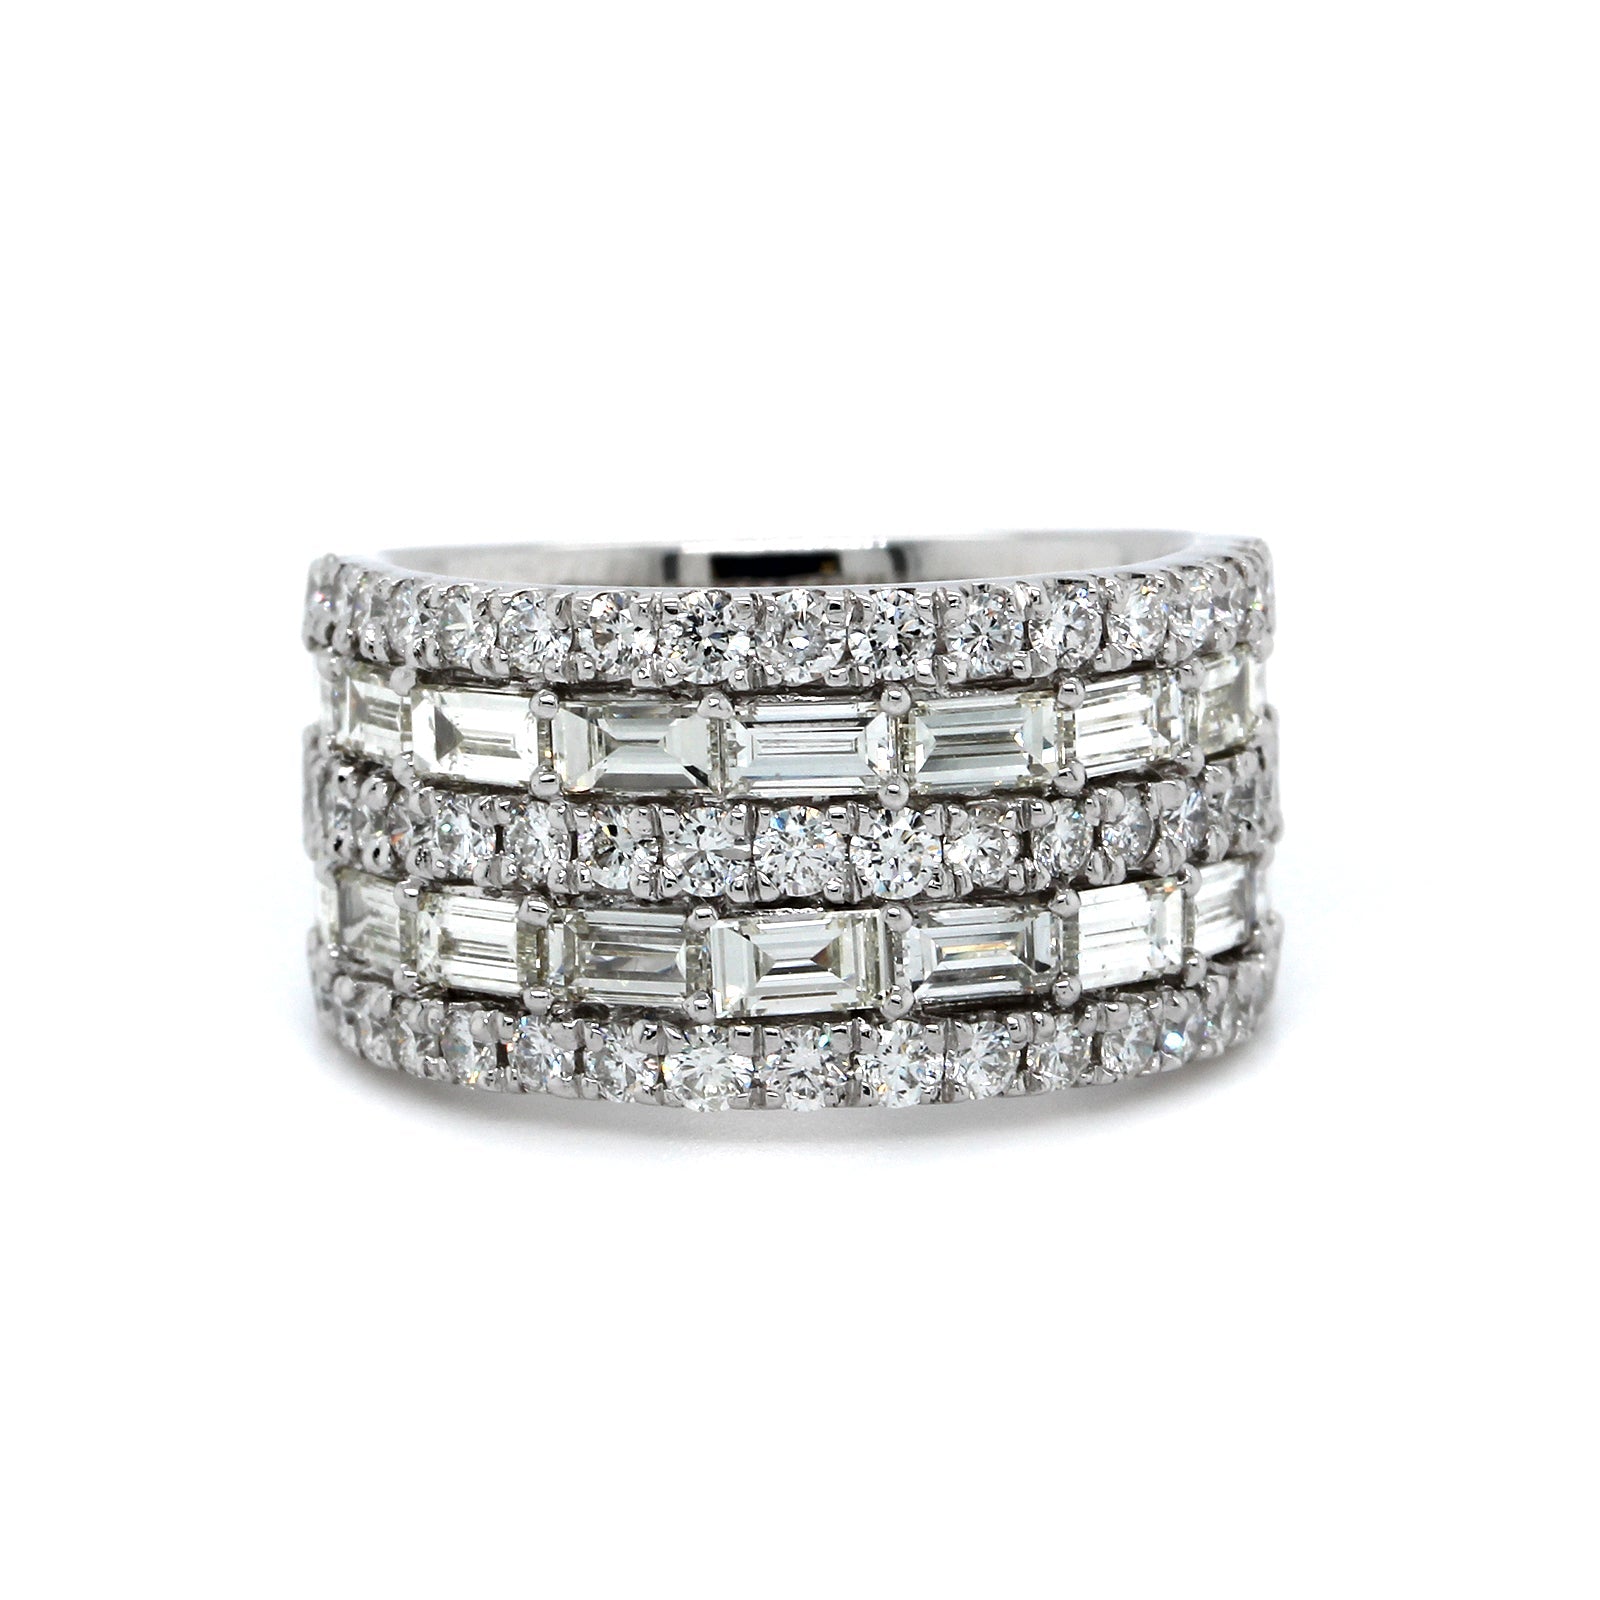 14K White Gold 5 Row Round and Baguette Diamond Ring, 14k white gold, Long's Jewelers